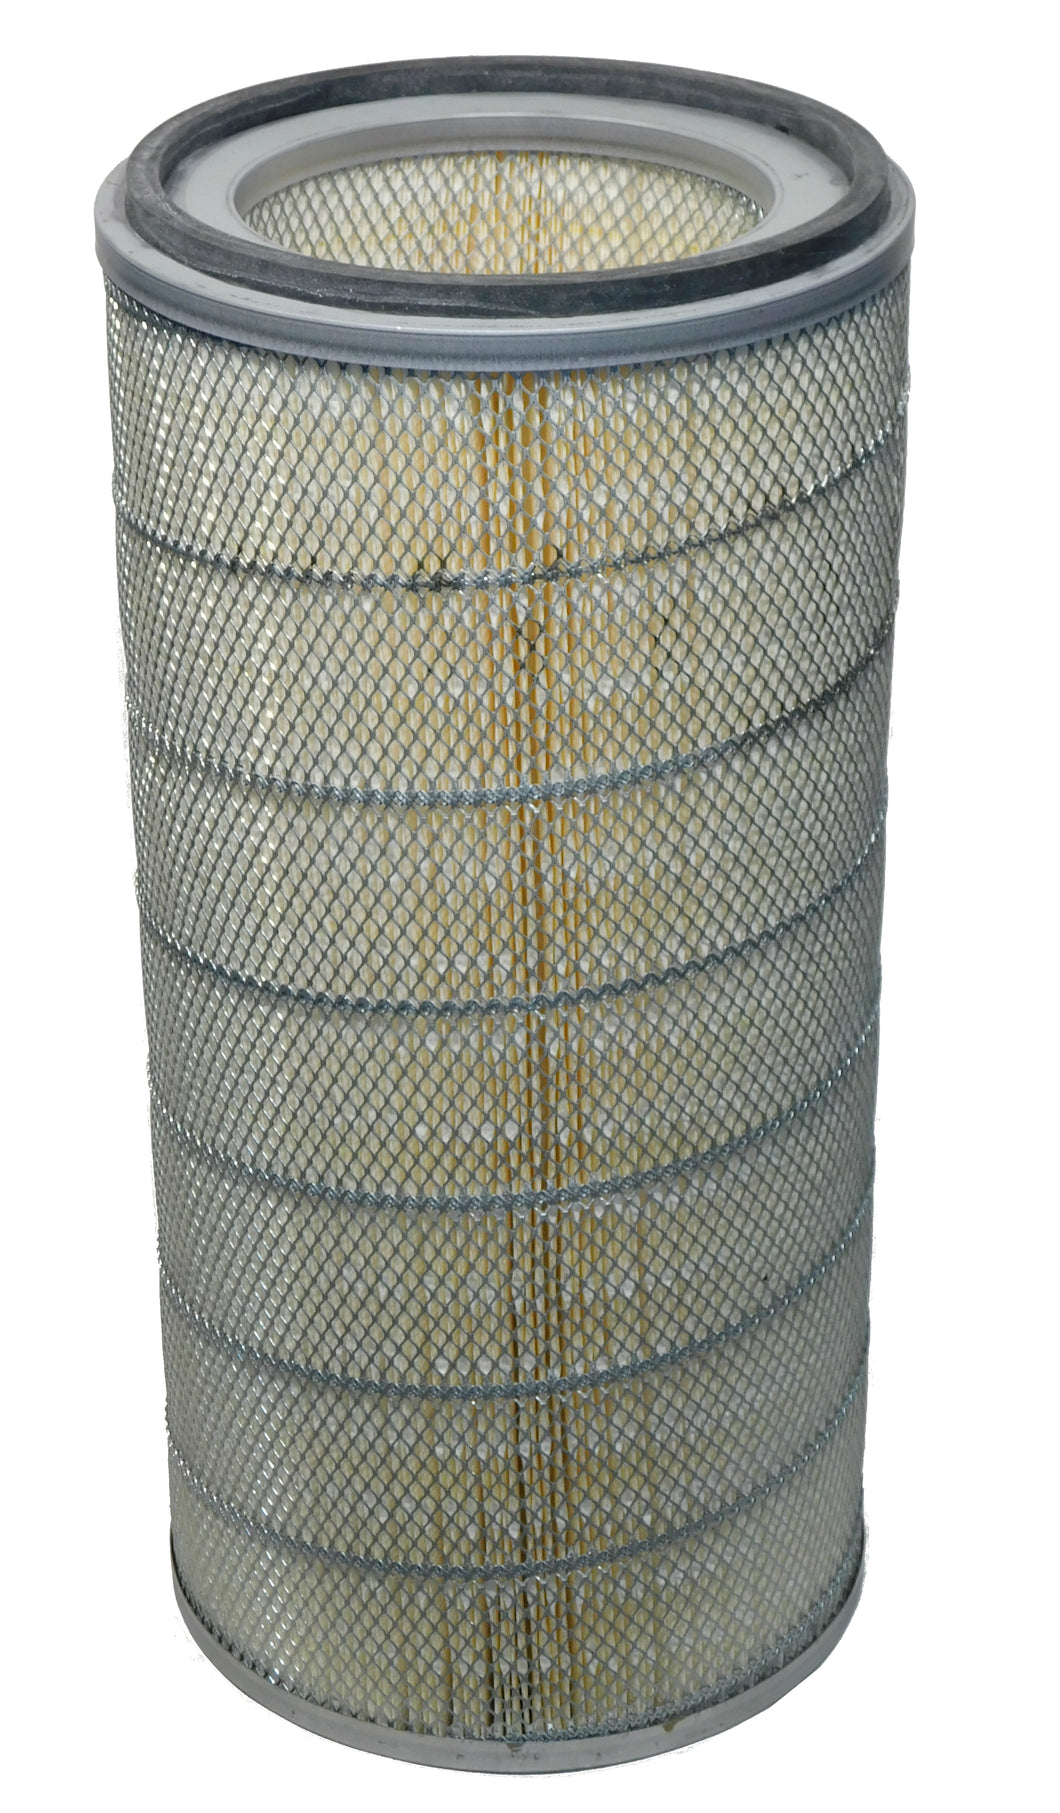 81-0072 - Universal Silencer - OEM Replacement Filter